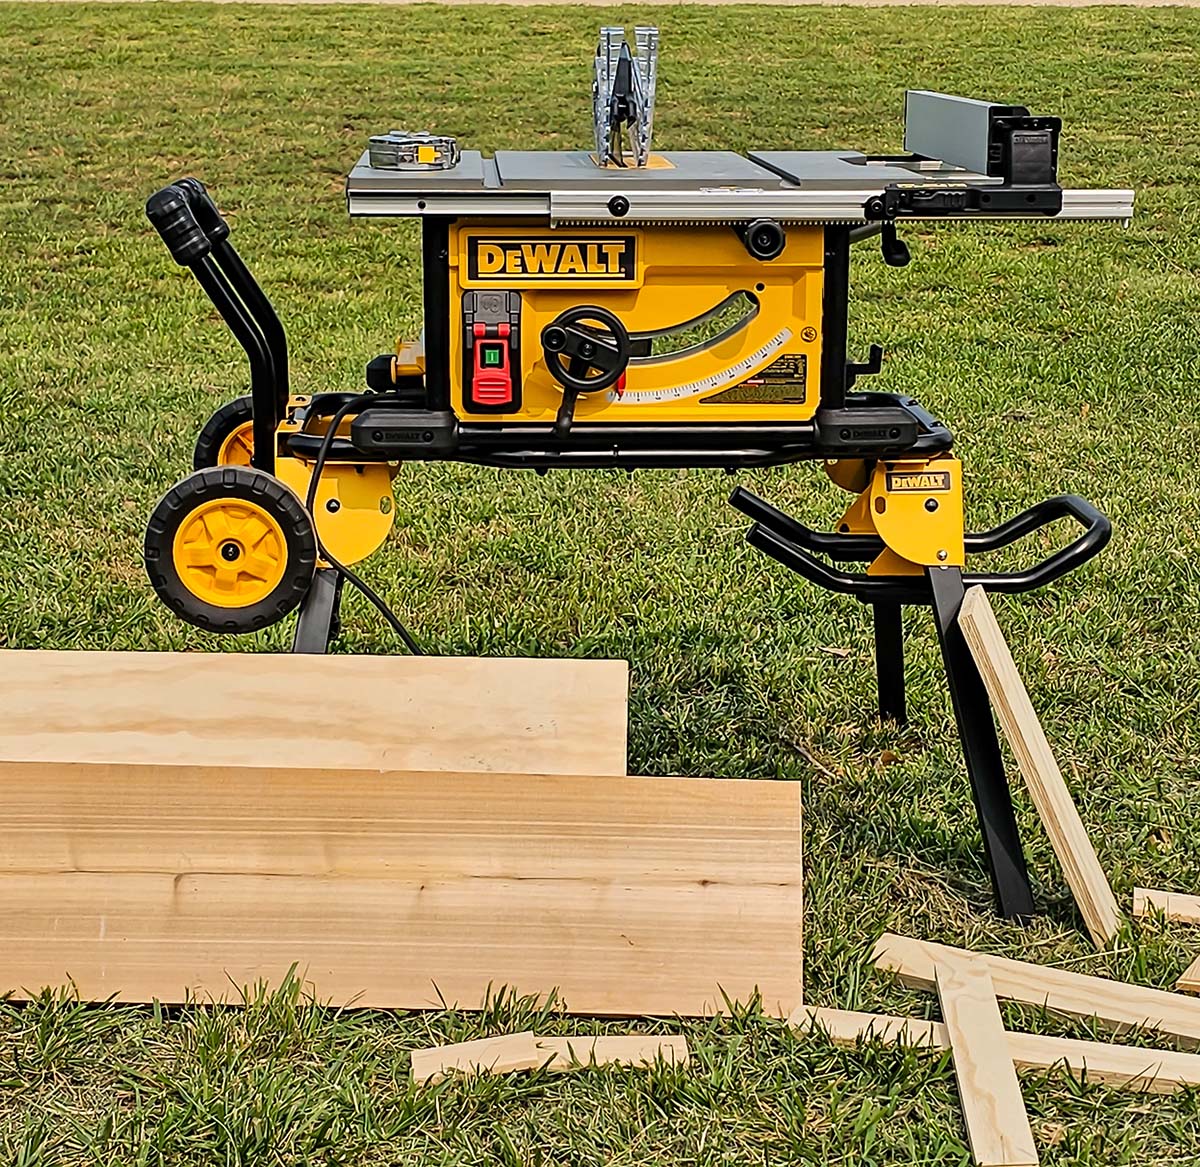 The DeWalt 10-inch table saw sitting on its stand in a yard while surrounded by several pieces of wood, some of which have been cut and some of which have not been cut